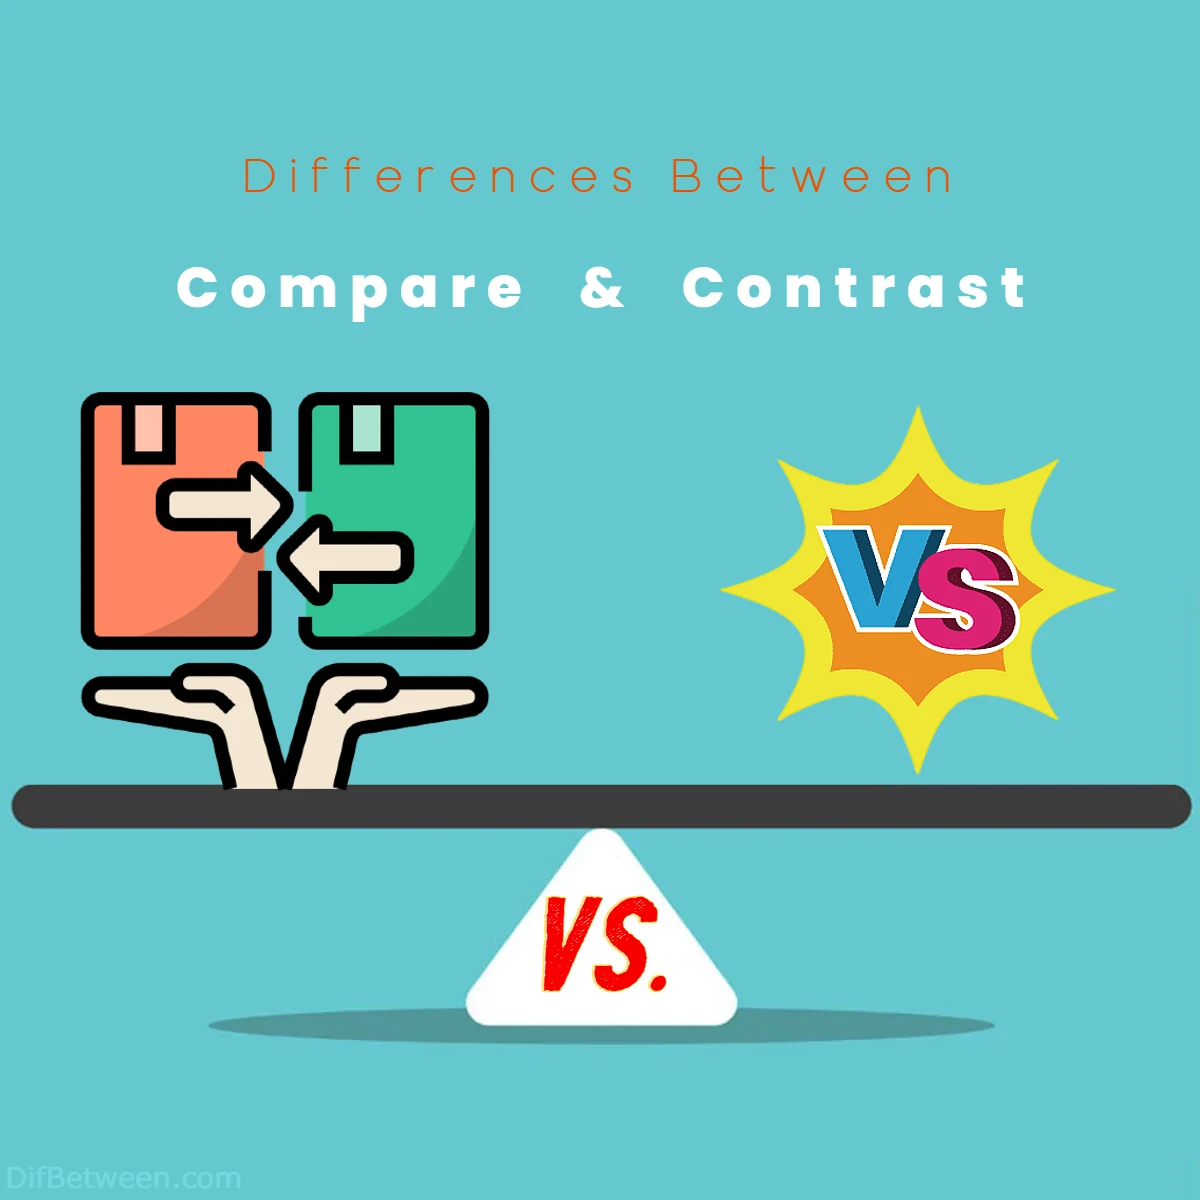 Differences Between Compare vs Contrast